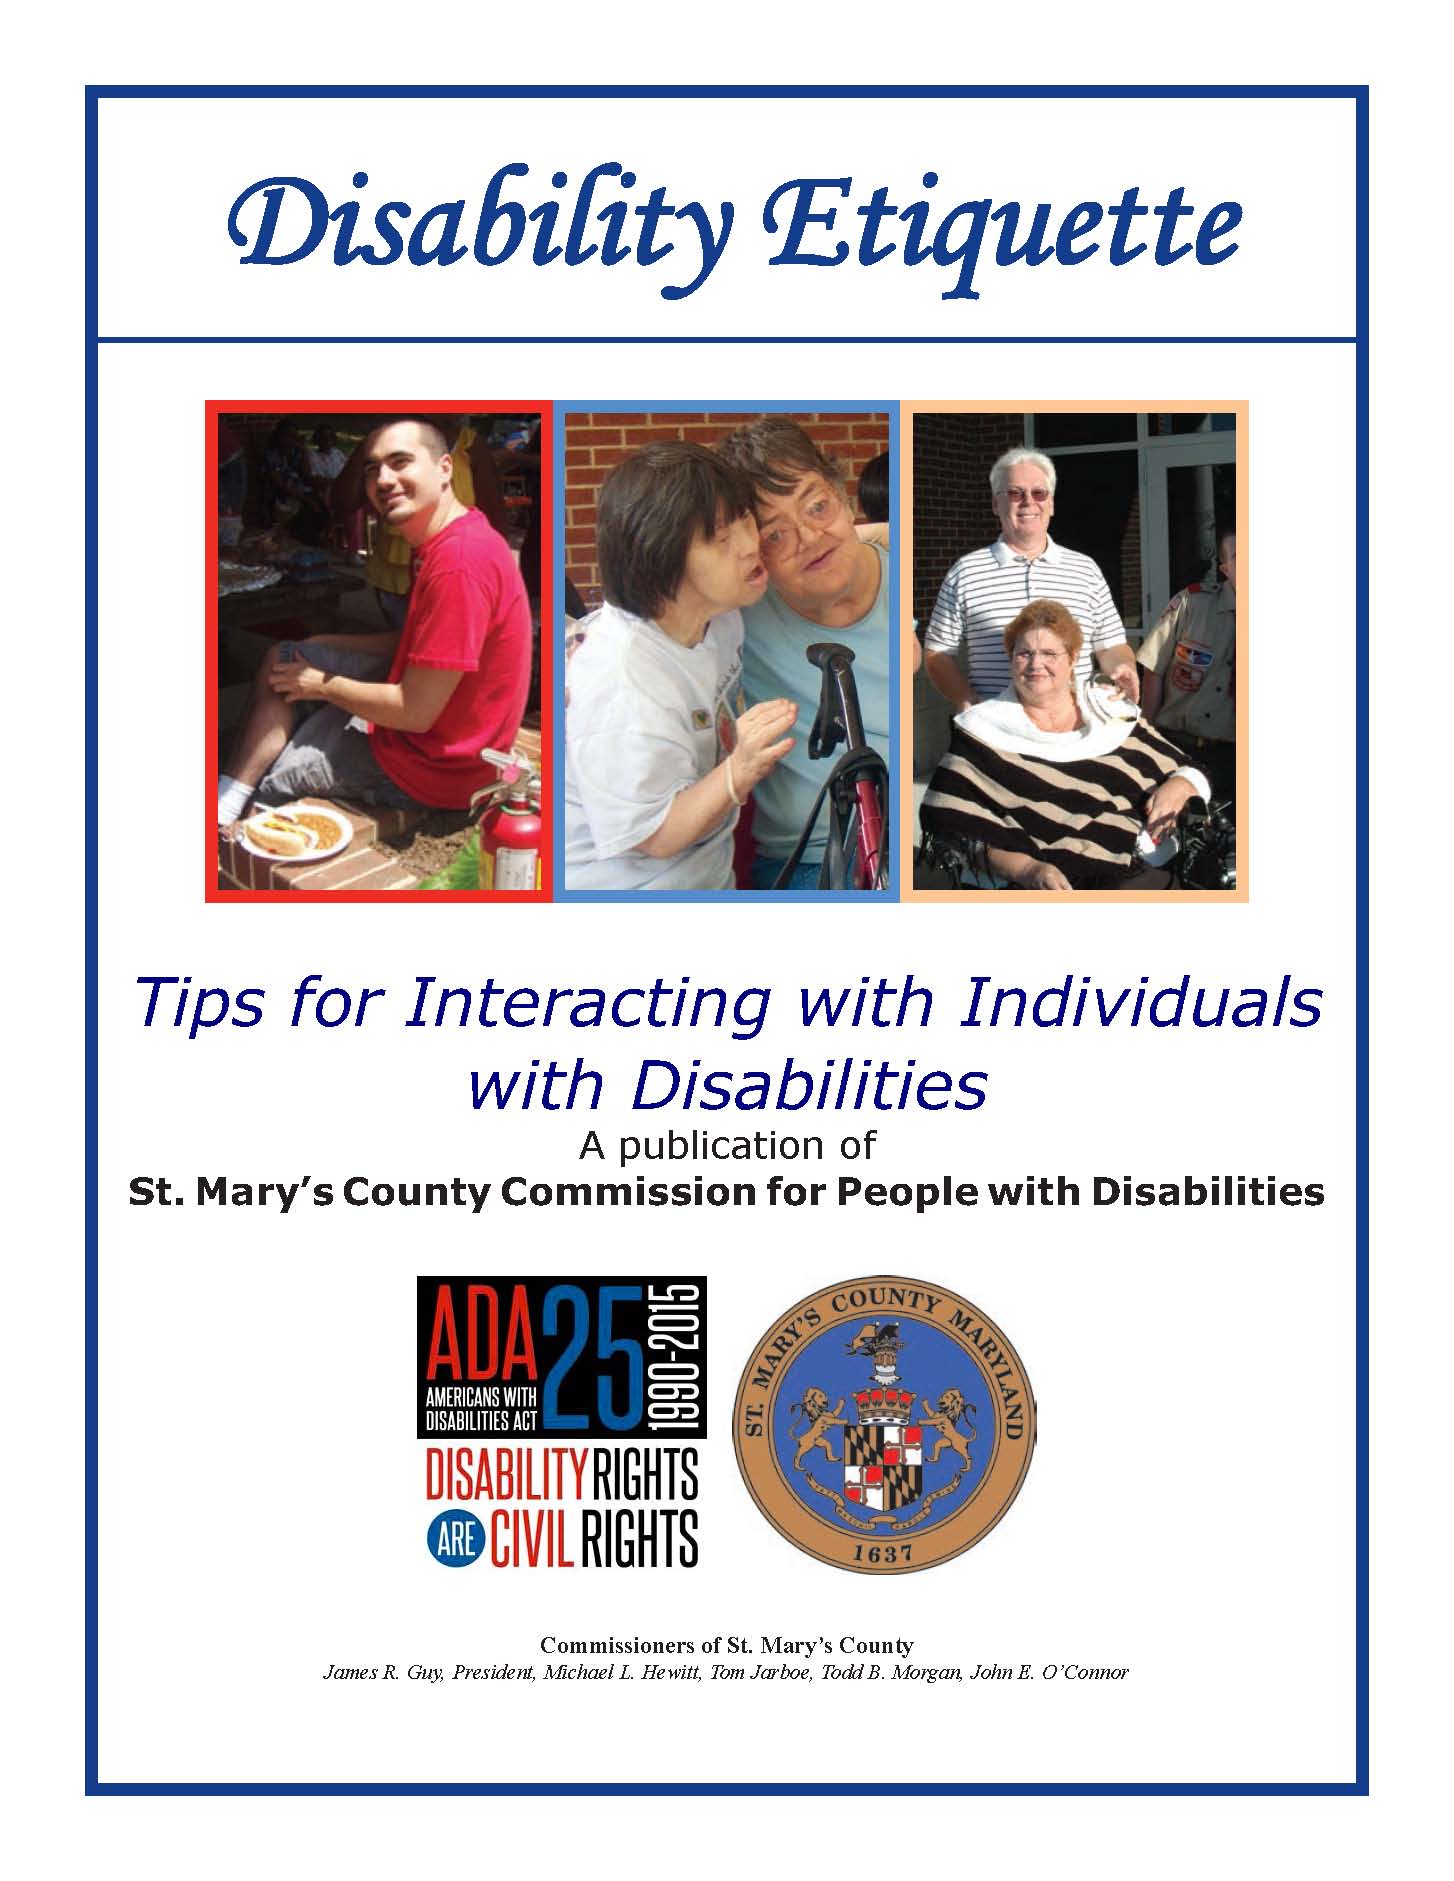 image of disability guide